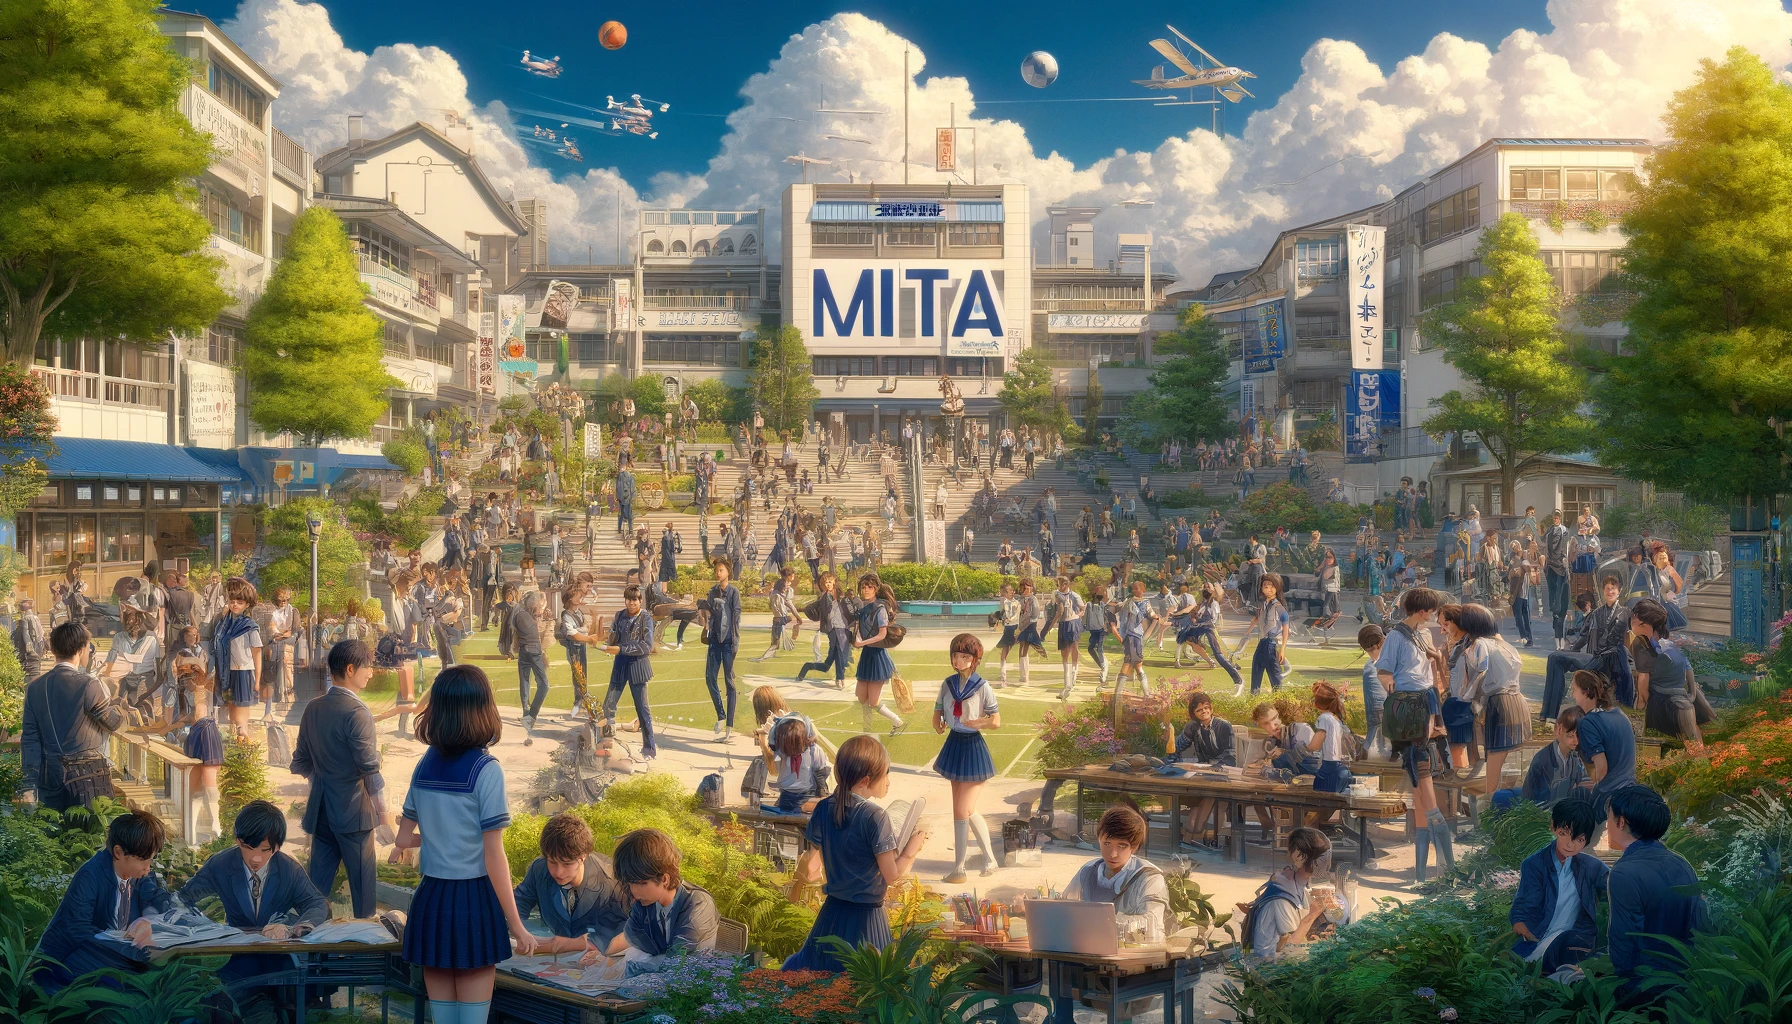 A lively and bustling high school campus scene depicting the popularity of Mita High School in Japan, with the word 'Mita' prominently displayed in multiple locations including the sky and on banners held by students. The image features a diverse group of students of various Asian descents, in school uniforms, actively participating in a variety of outdoor activities. The scene includes students engaged in discussions, sports, and studying in outdoor settings, with a backdrop of modern and traditional school buildings. The landscape is lush with trees and flowers, symbolizing a vibrant school life. The atmosphere is energetic and joyful, reflecting a highly regarded and active educational environment.